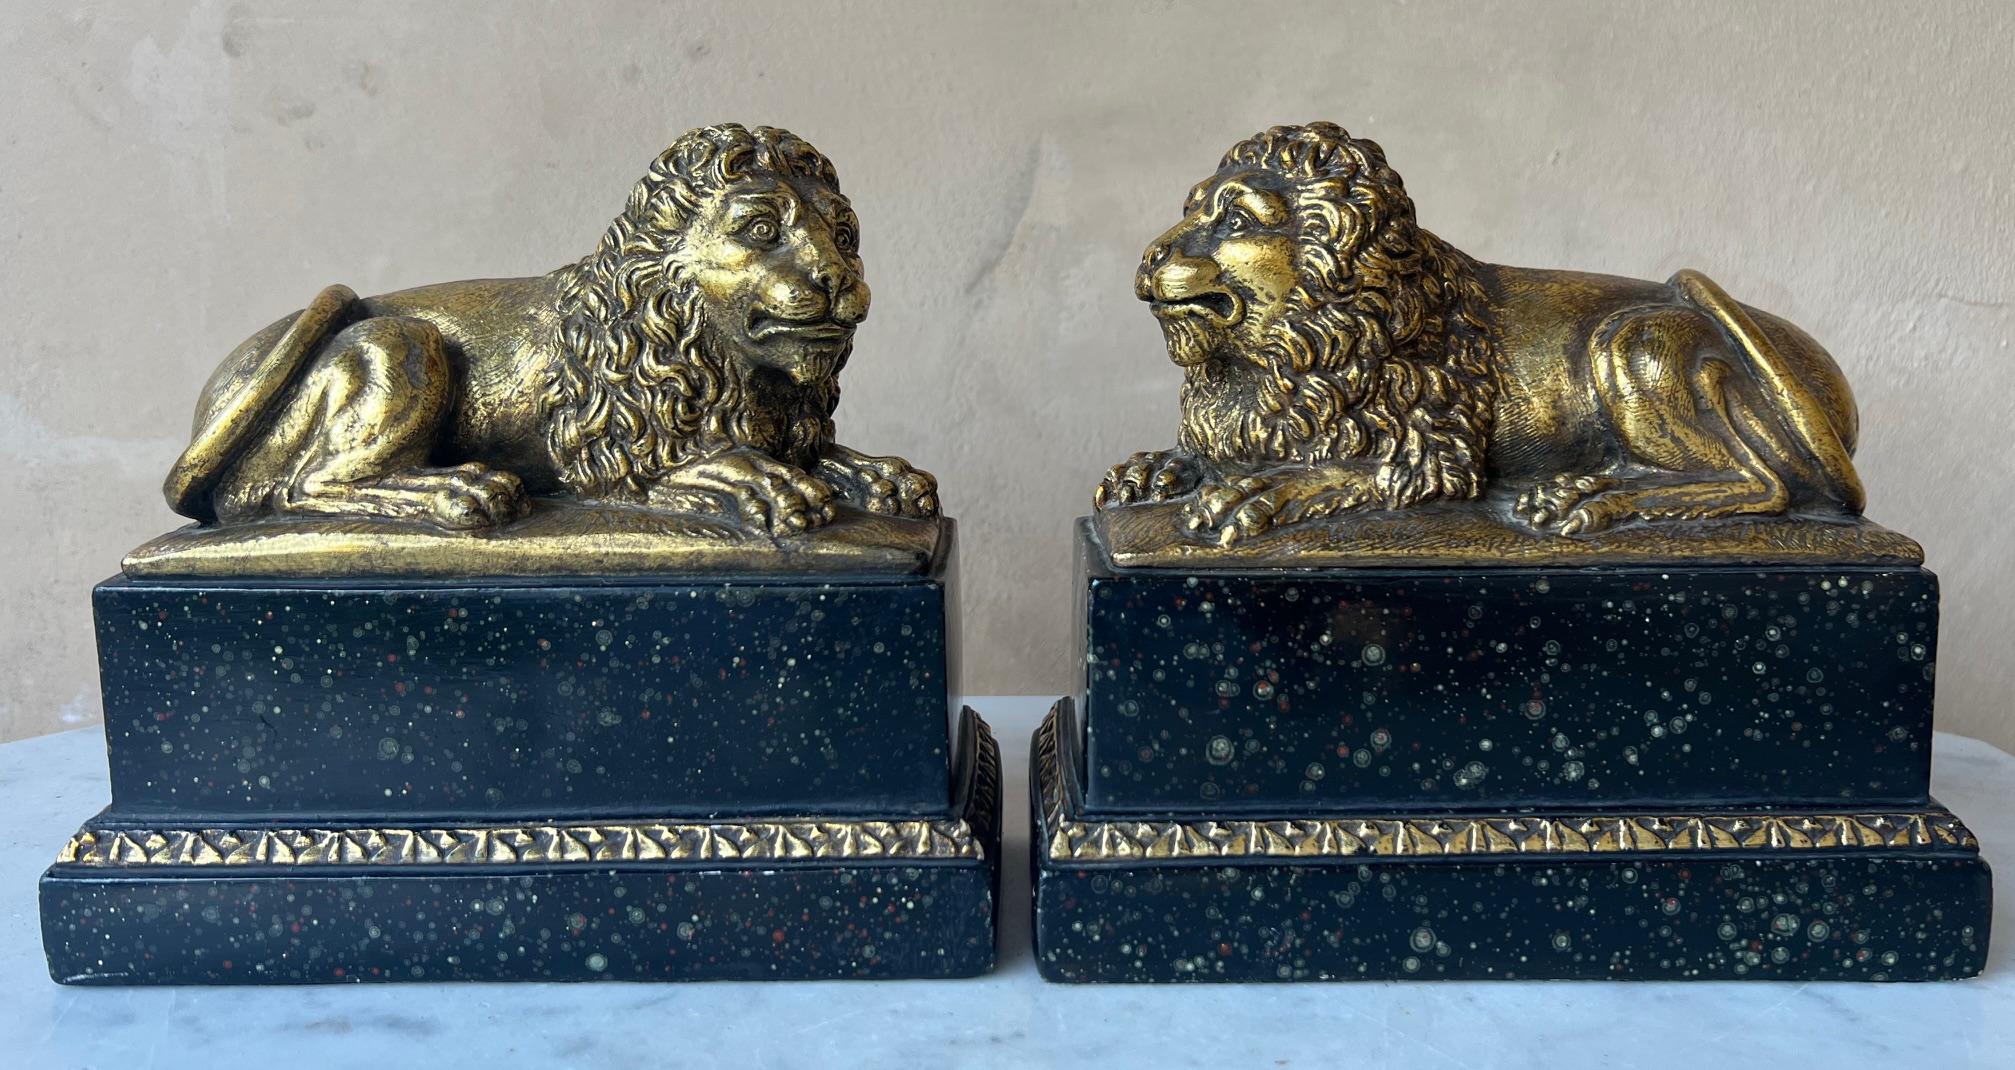 Napoleon III  Vintage Italian Recumbent Lion Bookends by Borghese, c. 1960's